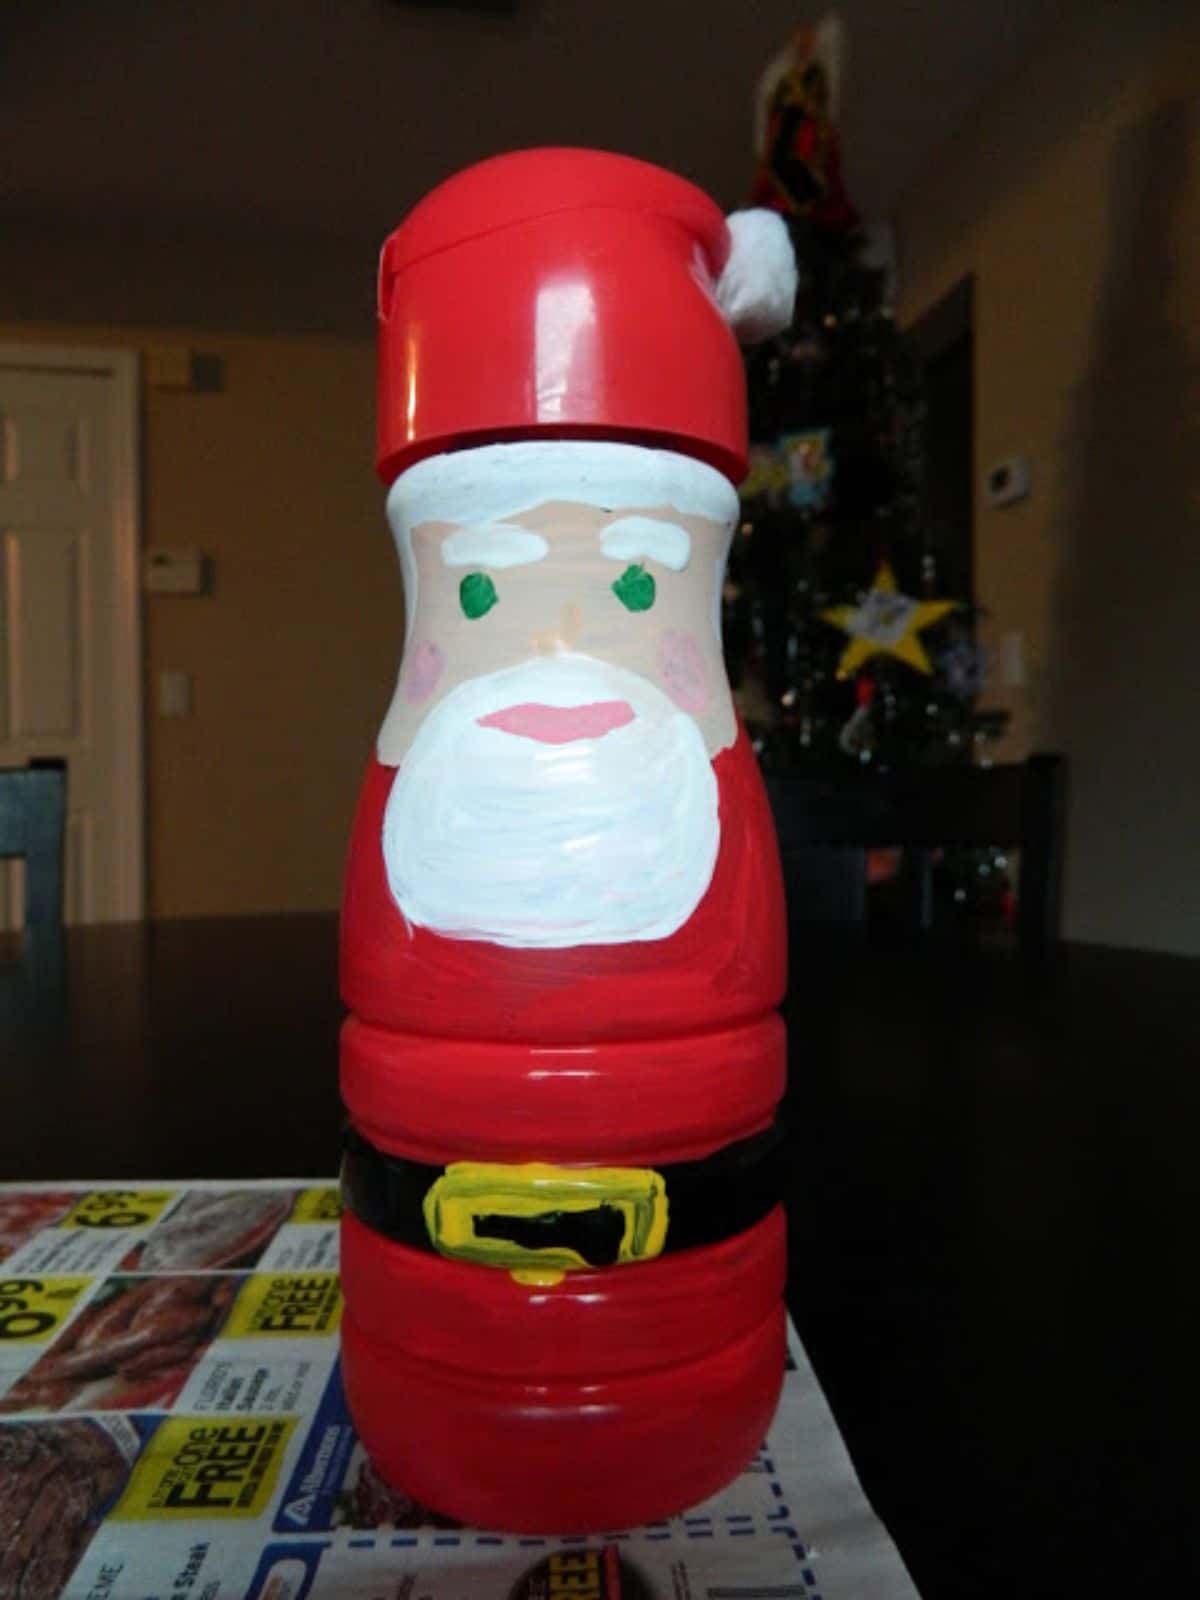 on a piece of newspaper is a creamer bottle painted to look like santa